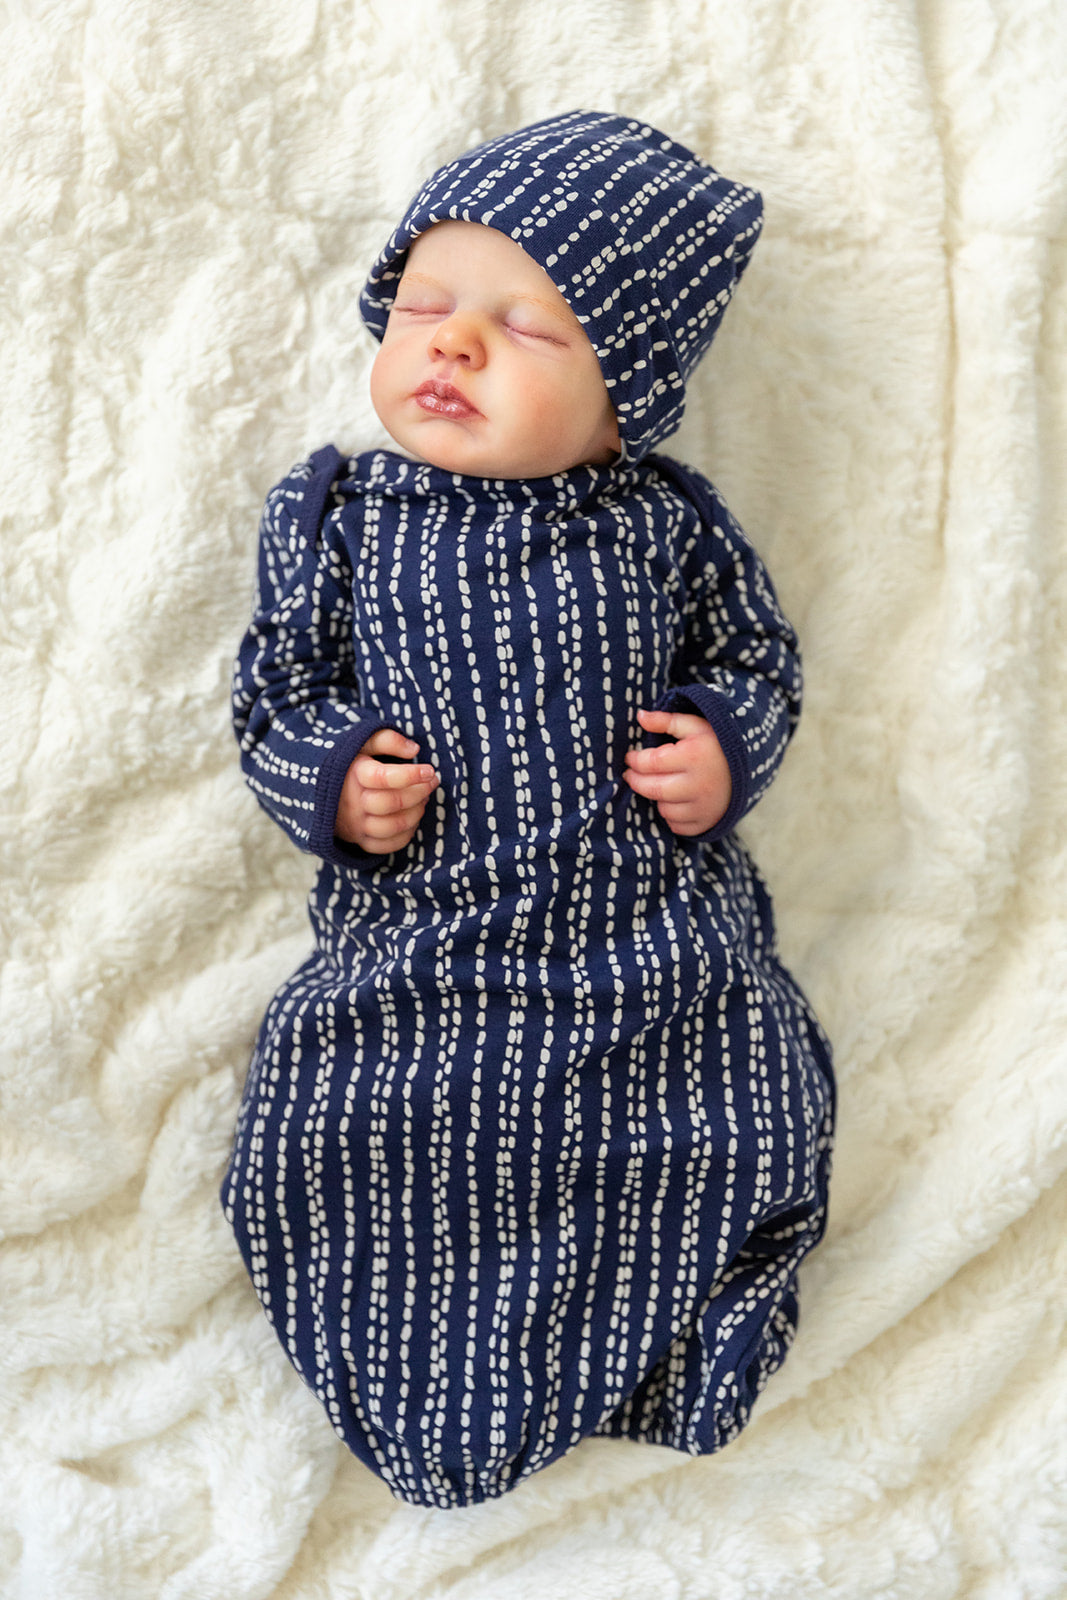 Luna Baby Coming Home Outfit and Matching Newborn Hat